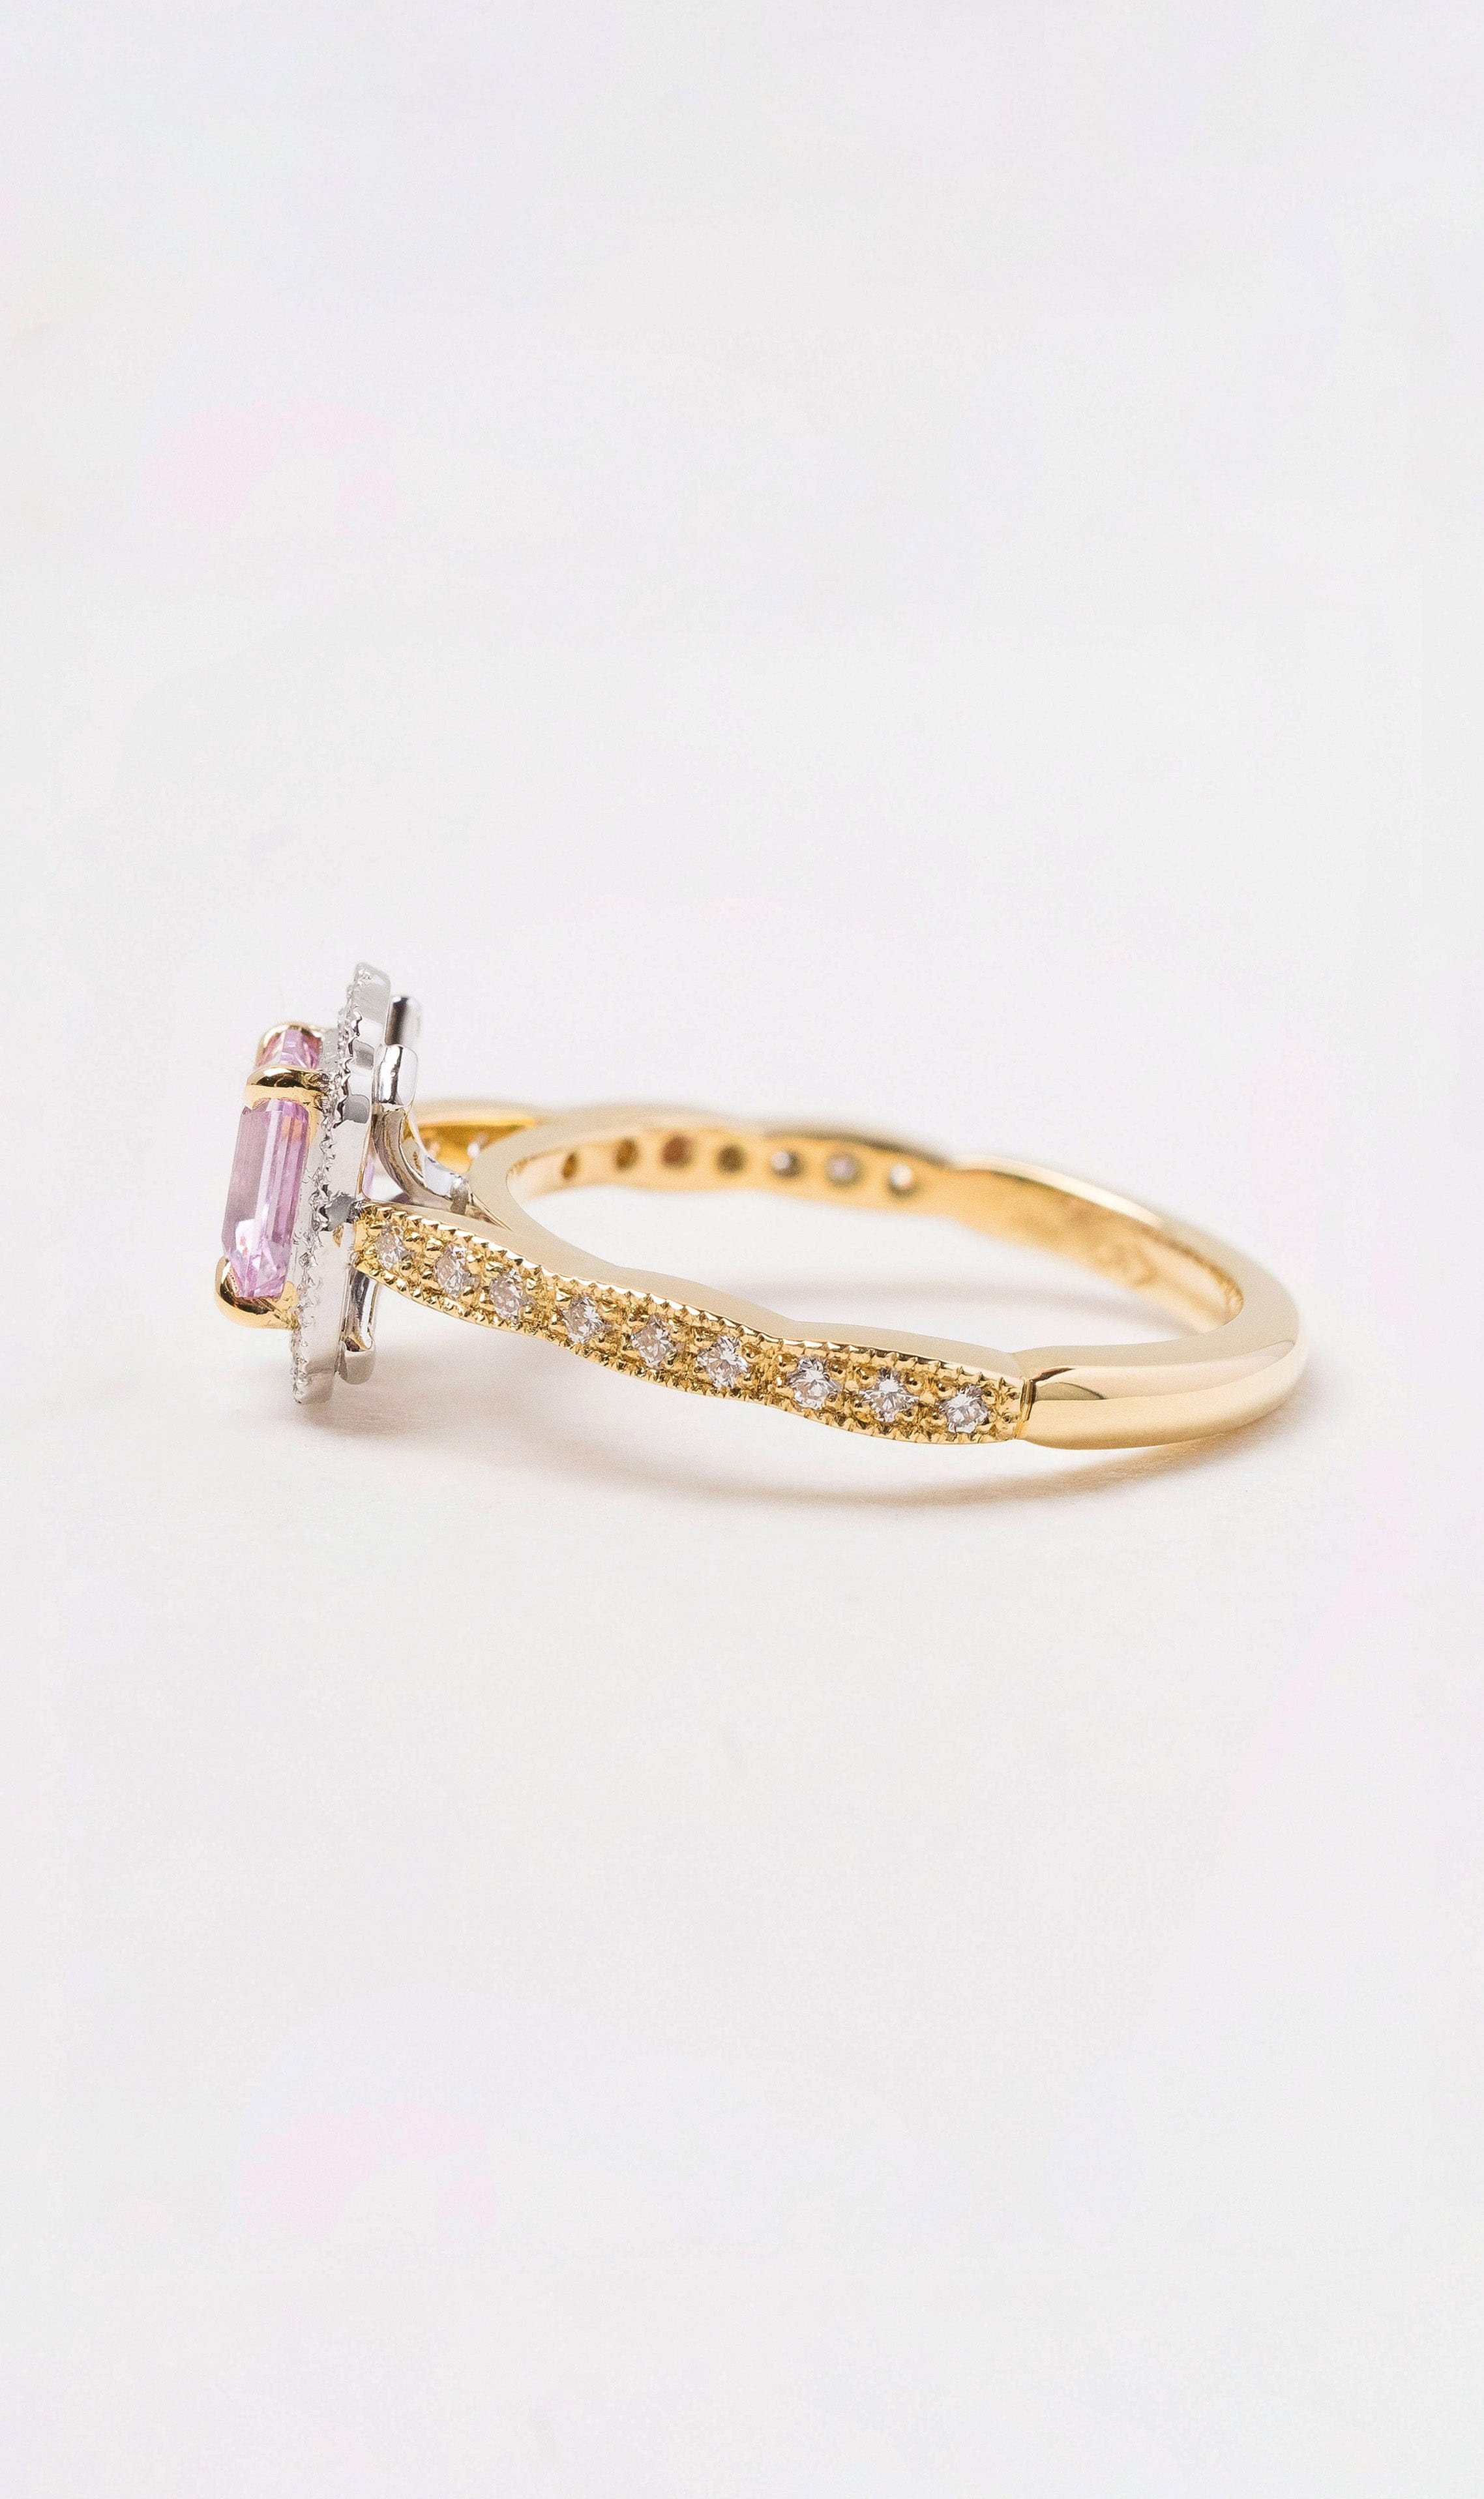 Hogans Family Jewellers 18K YWG Emerald Cut Pink Sapphire Ring